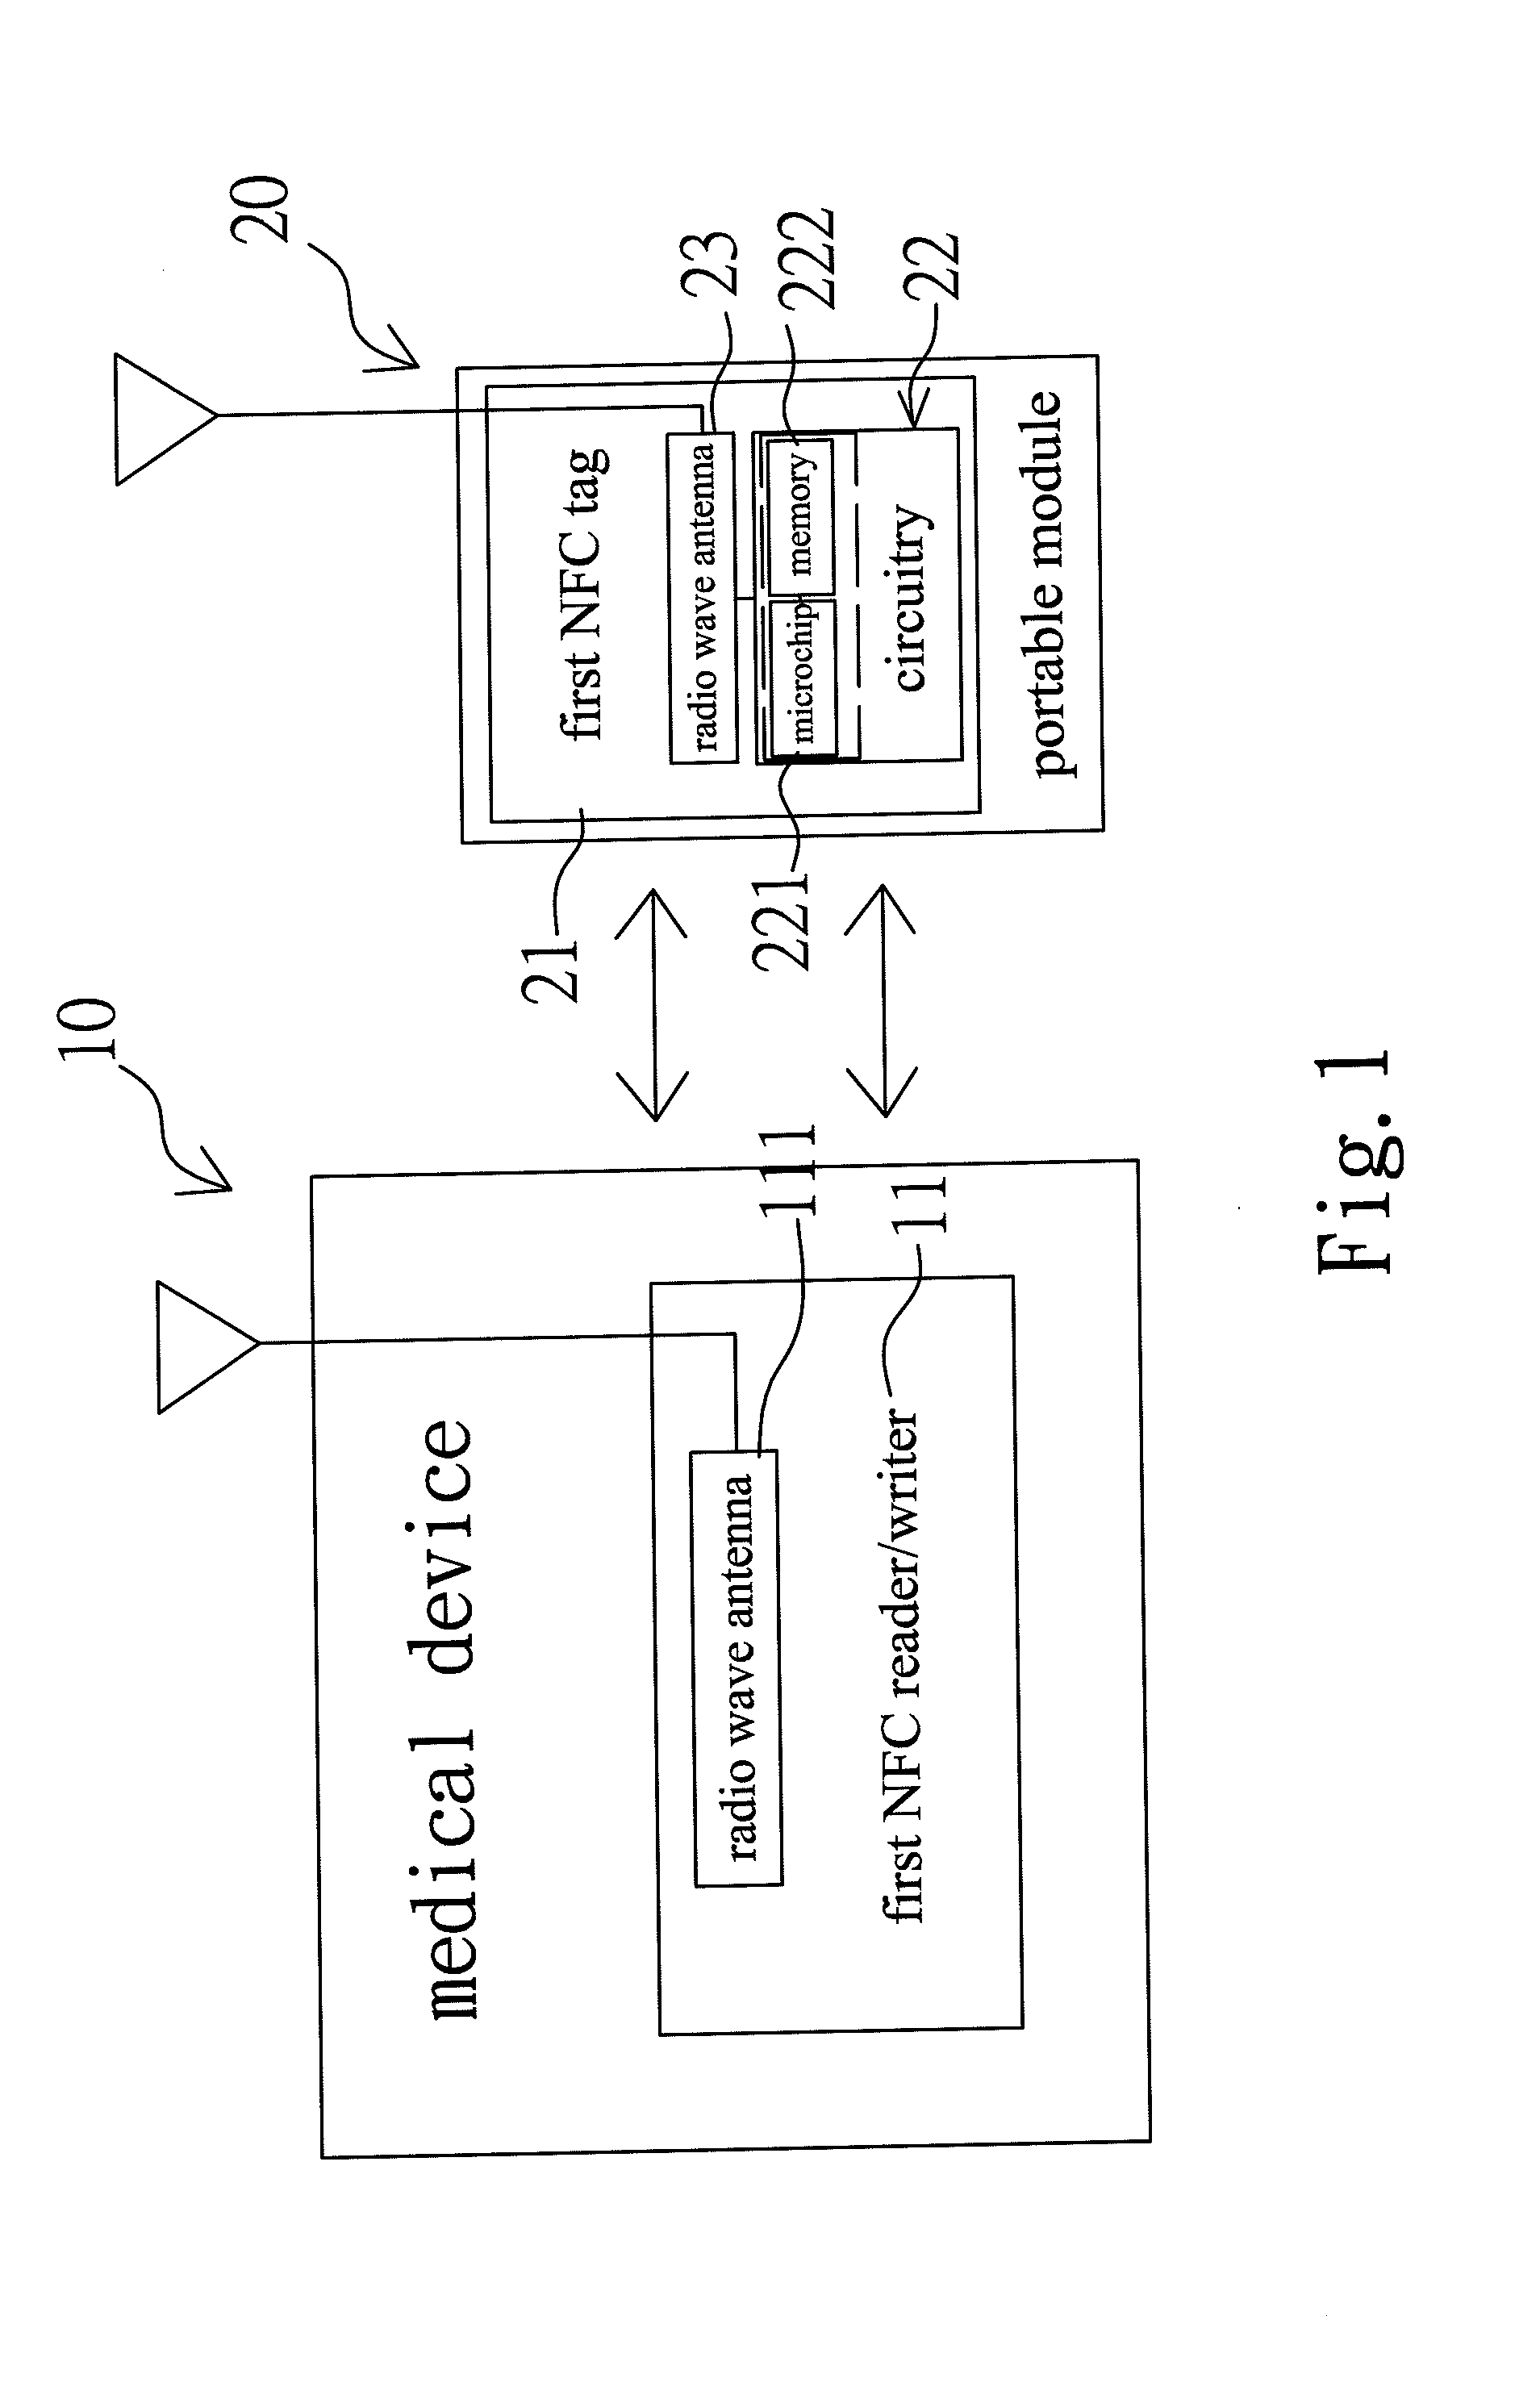 Near field communication enabled medical device system